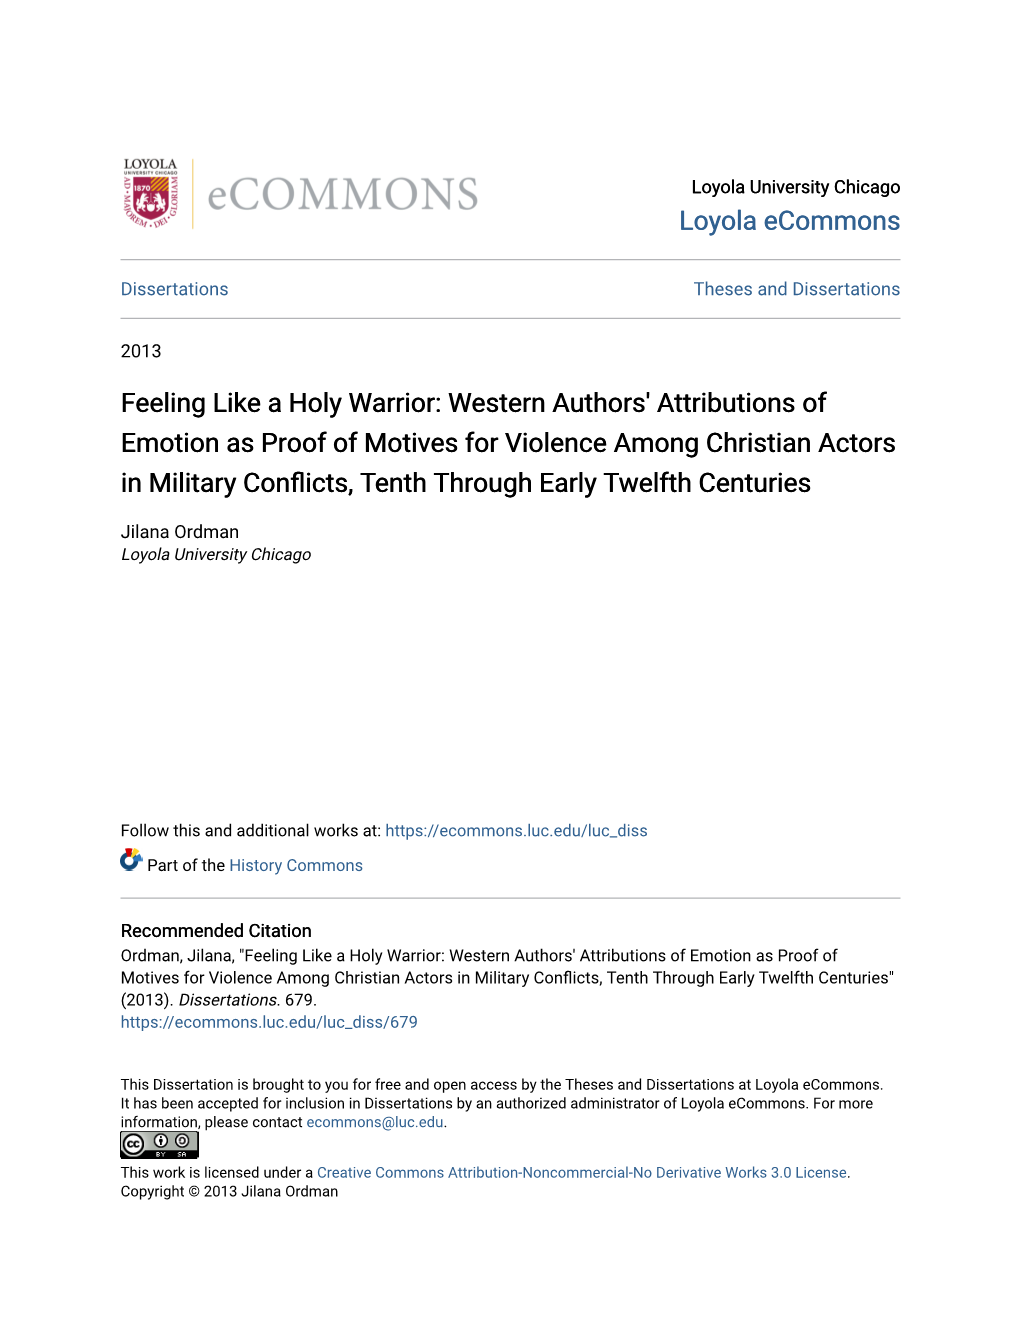 Feeling Like a Holy Warrior: Western Authors' Attributions of Emotion As